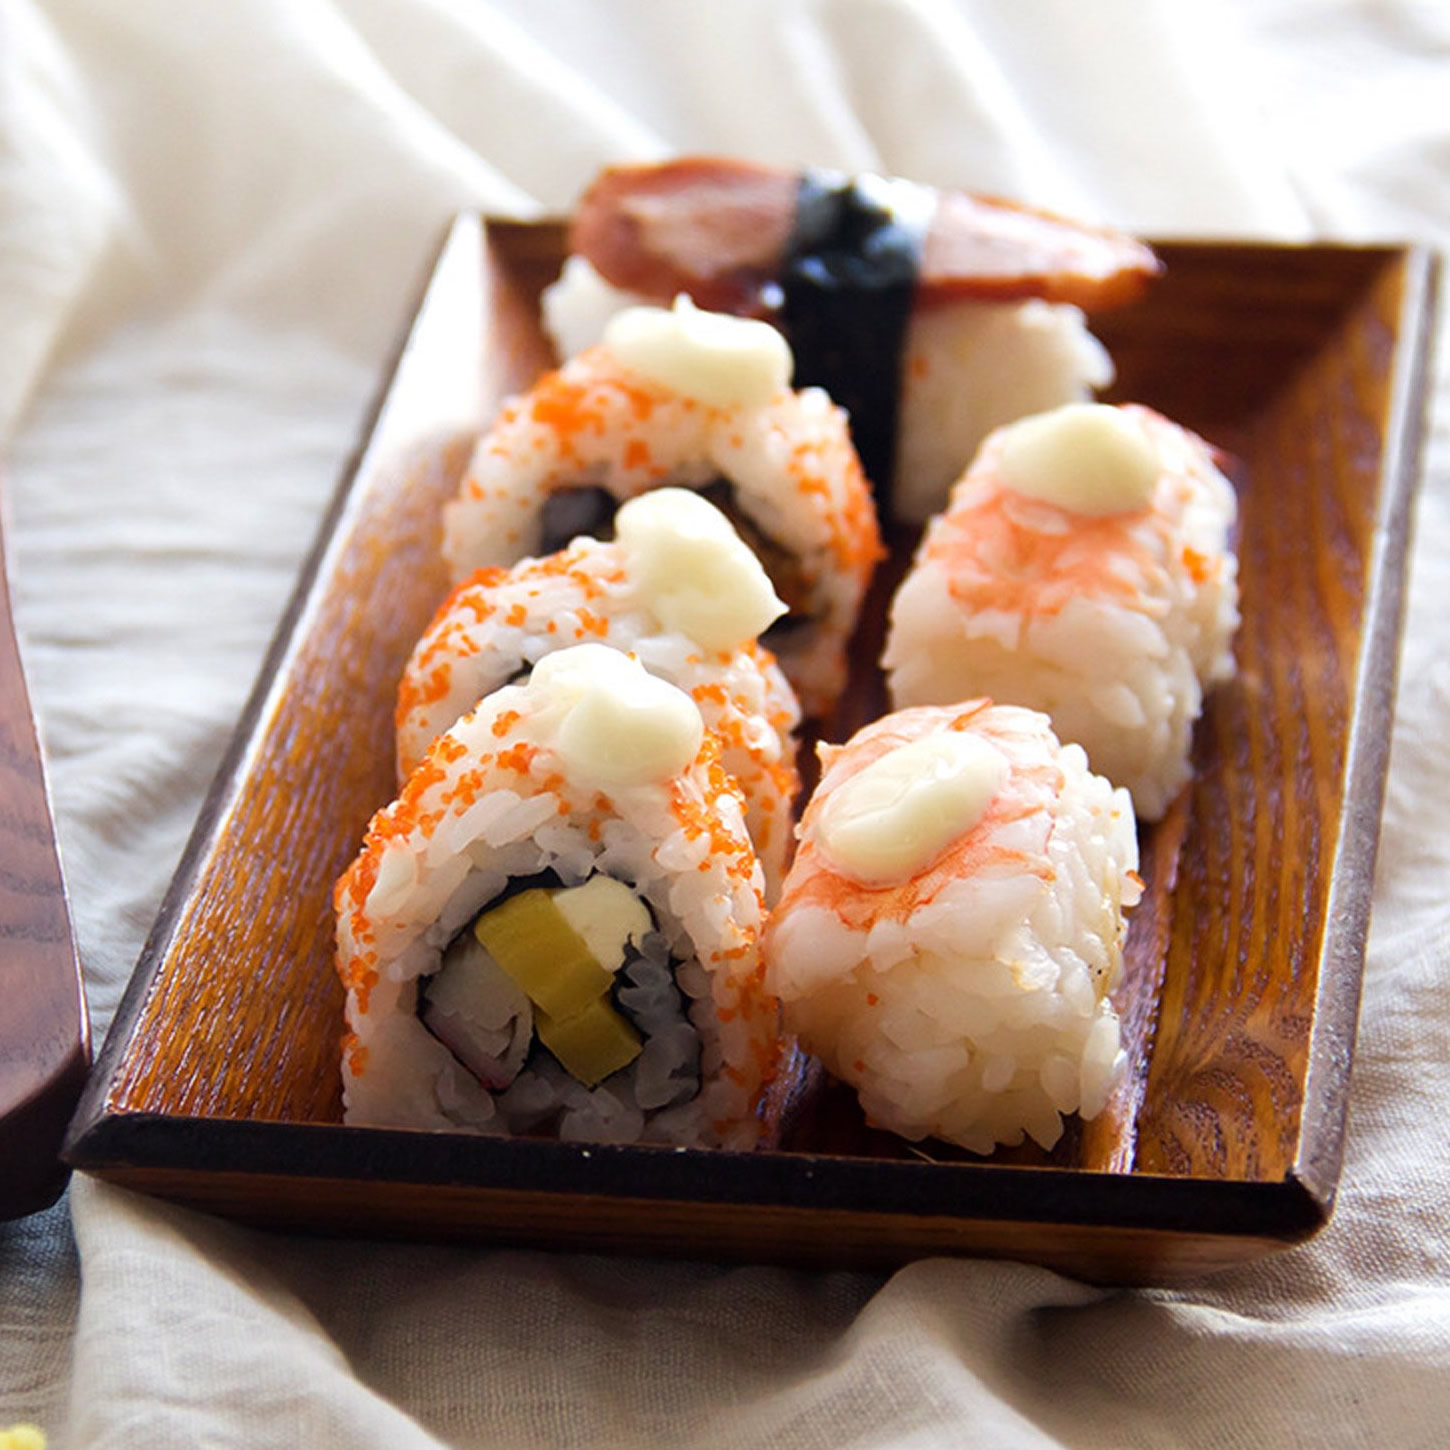 Wooden Plate With Sushi